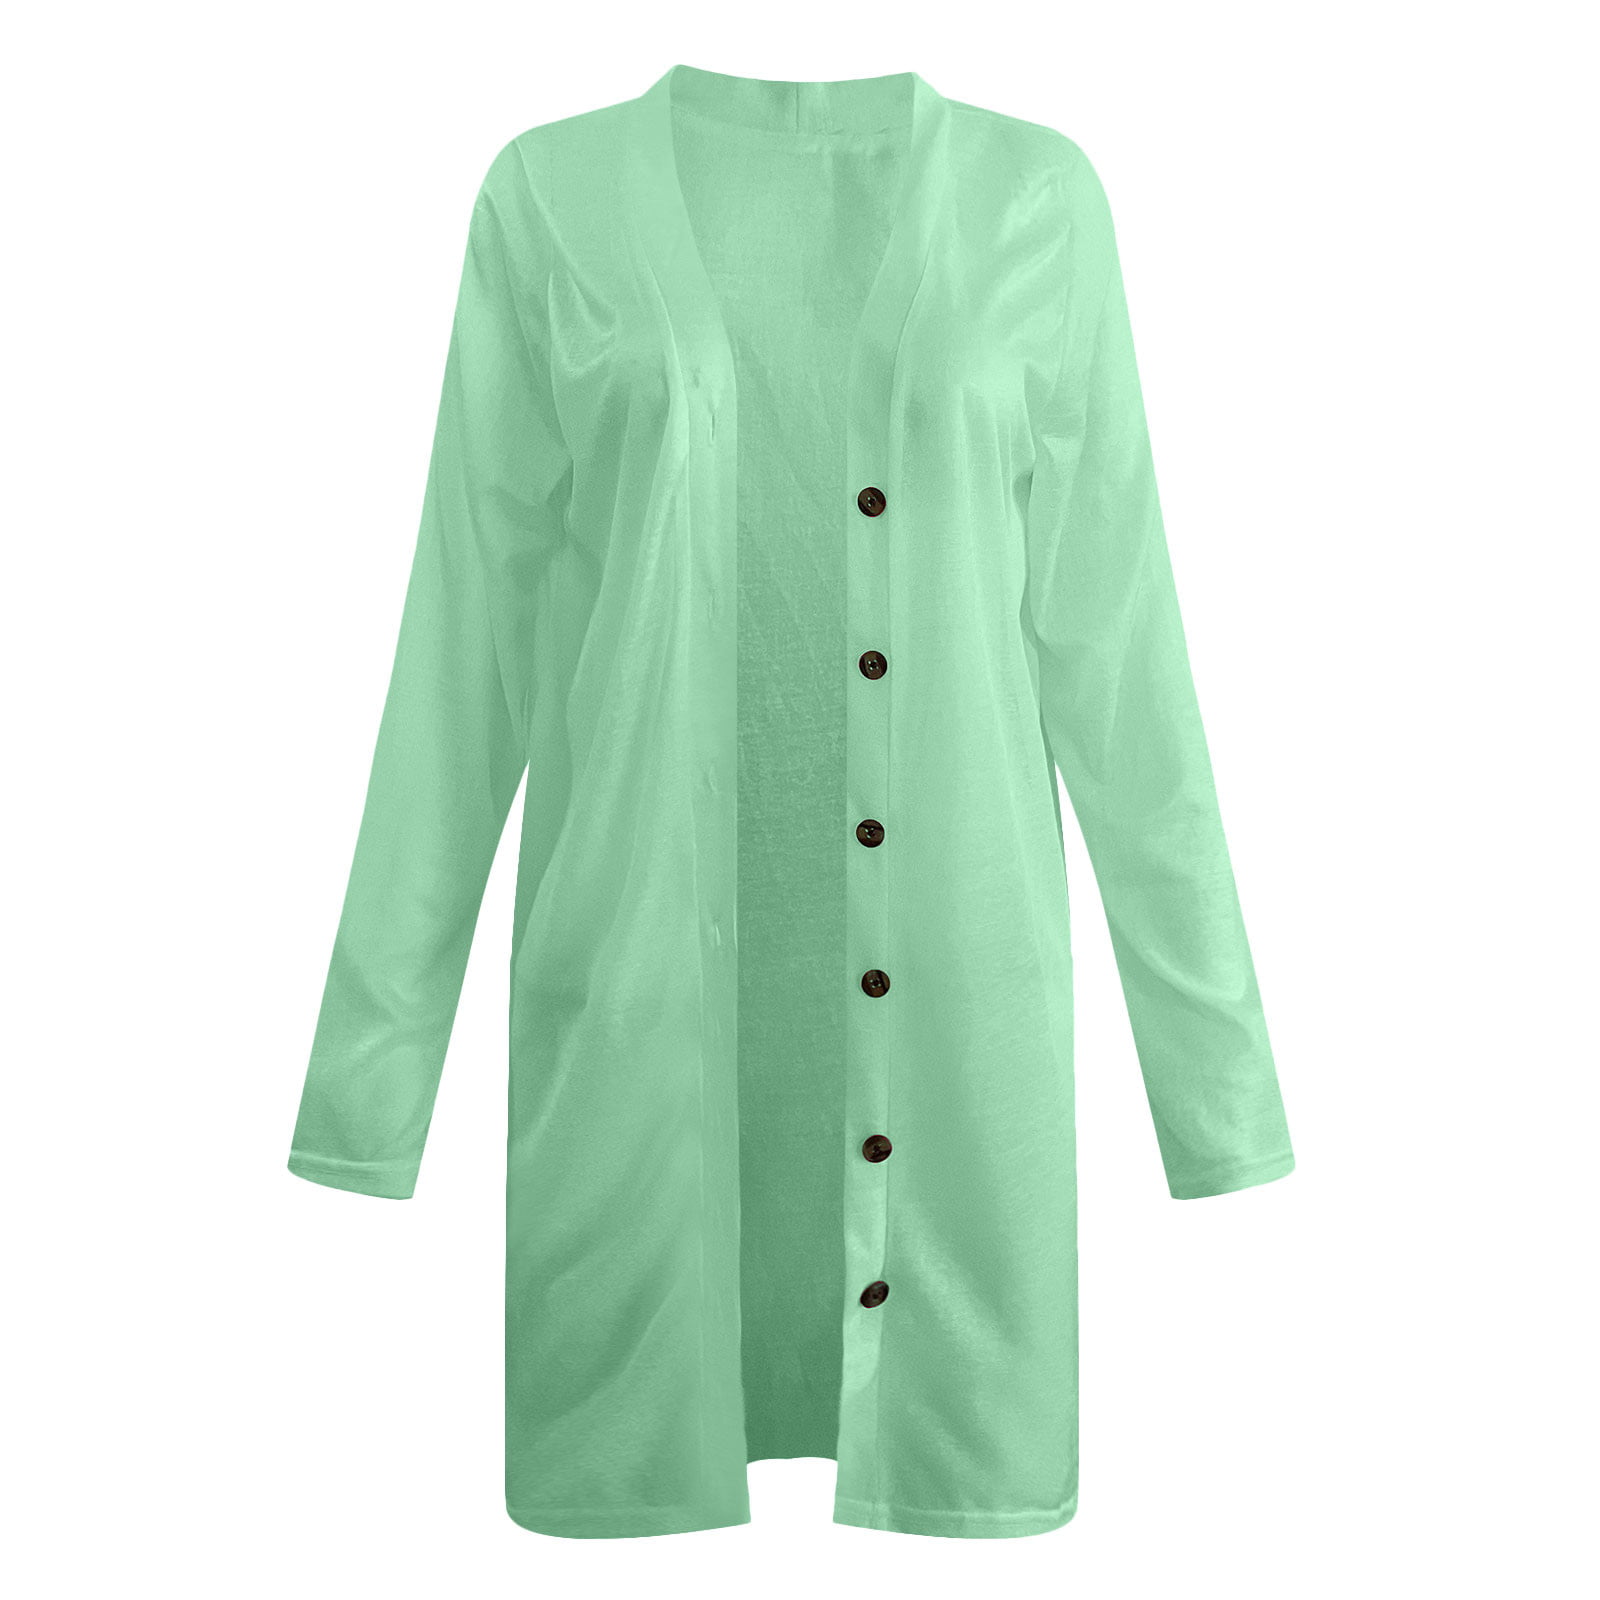 Gosuguu Clearance Light Cardigans for Women's Casual Lightweight Open Front  Cardigans Soft Draped Ruffles 3/4 Sleeve Cardigan # Flash Sales Today Deals  Prime Clearance Mint Green XXXL 